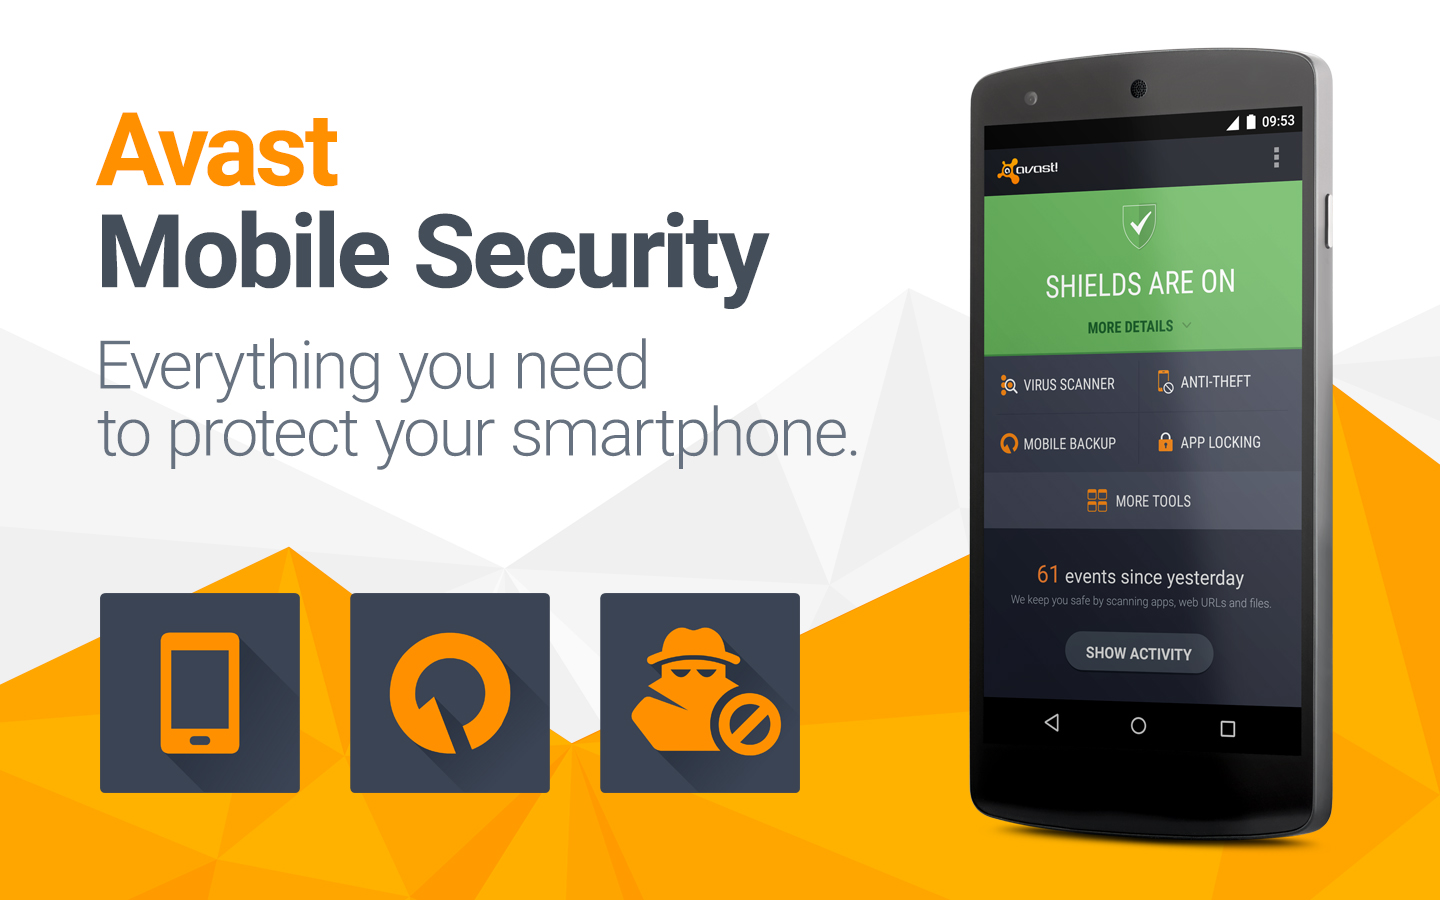 Avast Mobile Security 2020 6.30.1 full